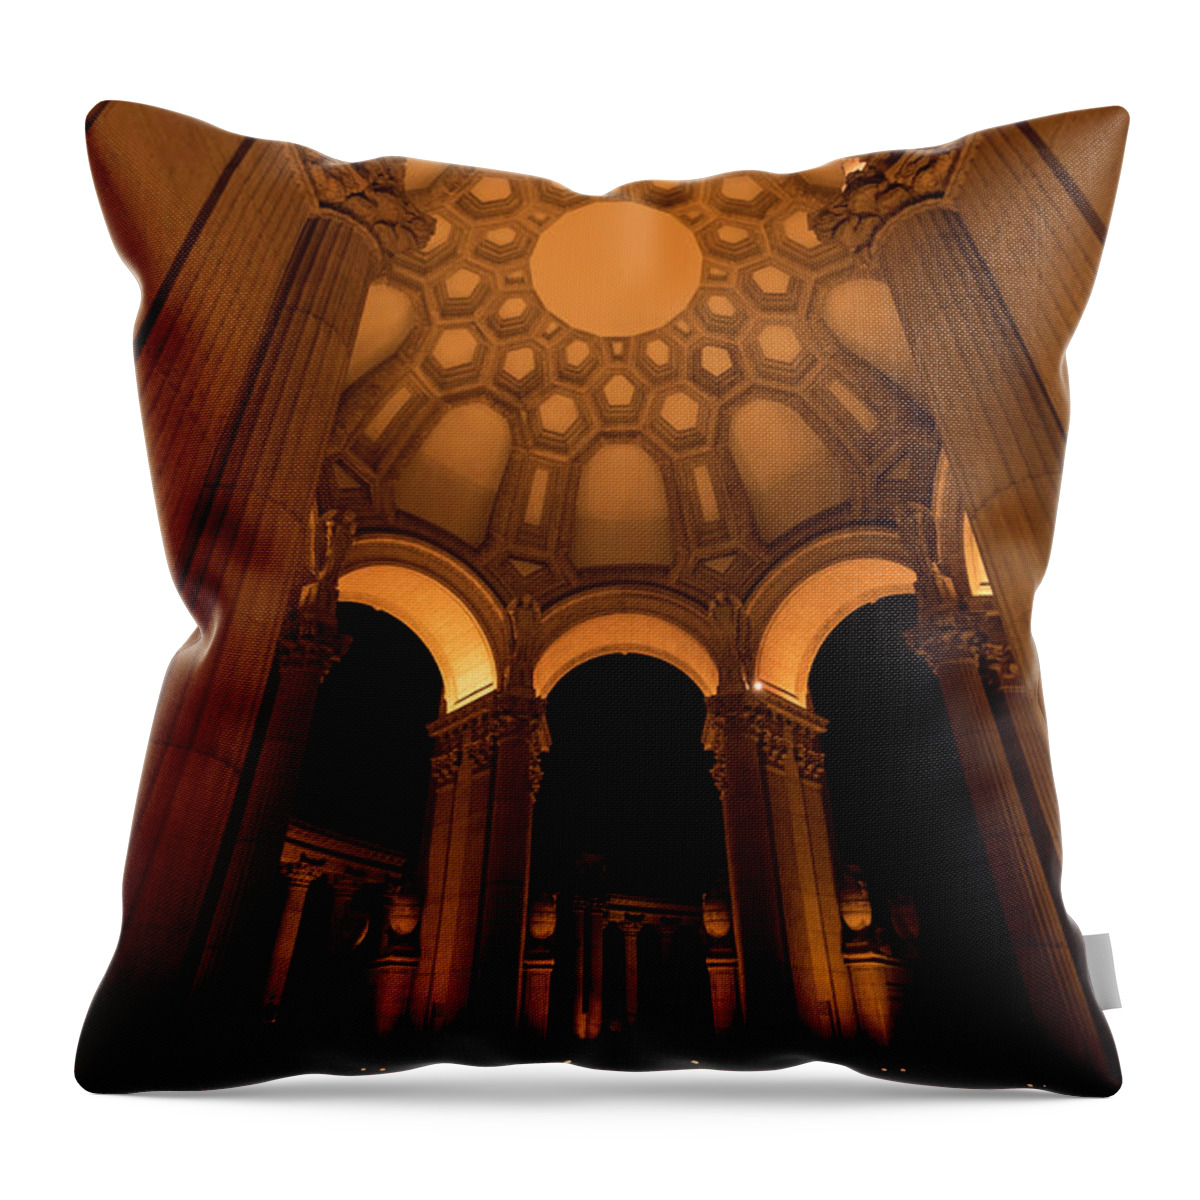  Architecture Throw Pillow featuring the photograph Looking up in the Rotunda by Scott Cunningham